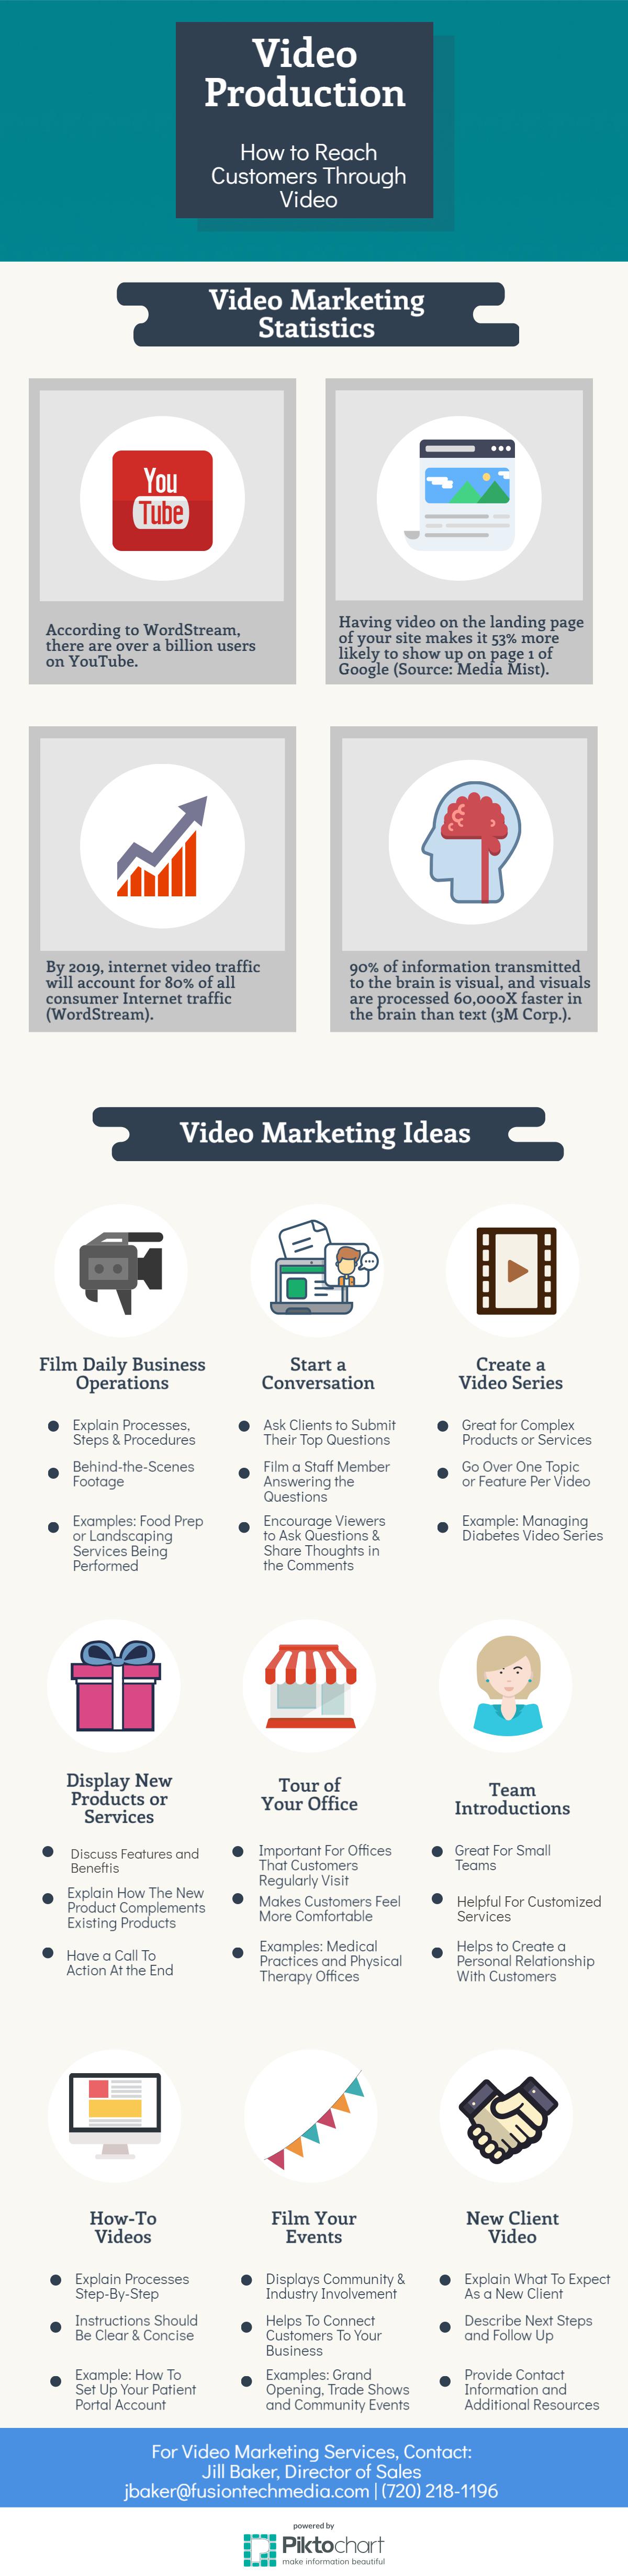 Video Marketing: How To Reach Customers Through Video [Infographic]